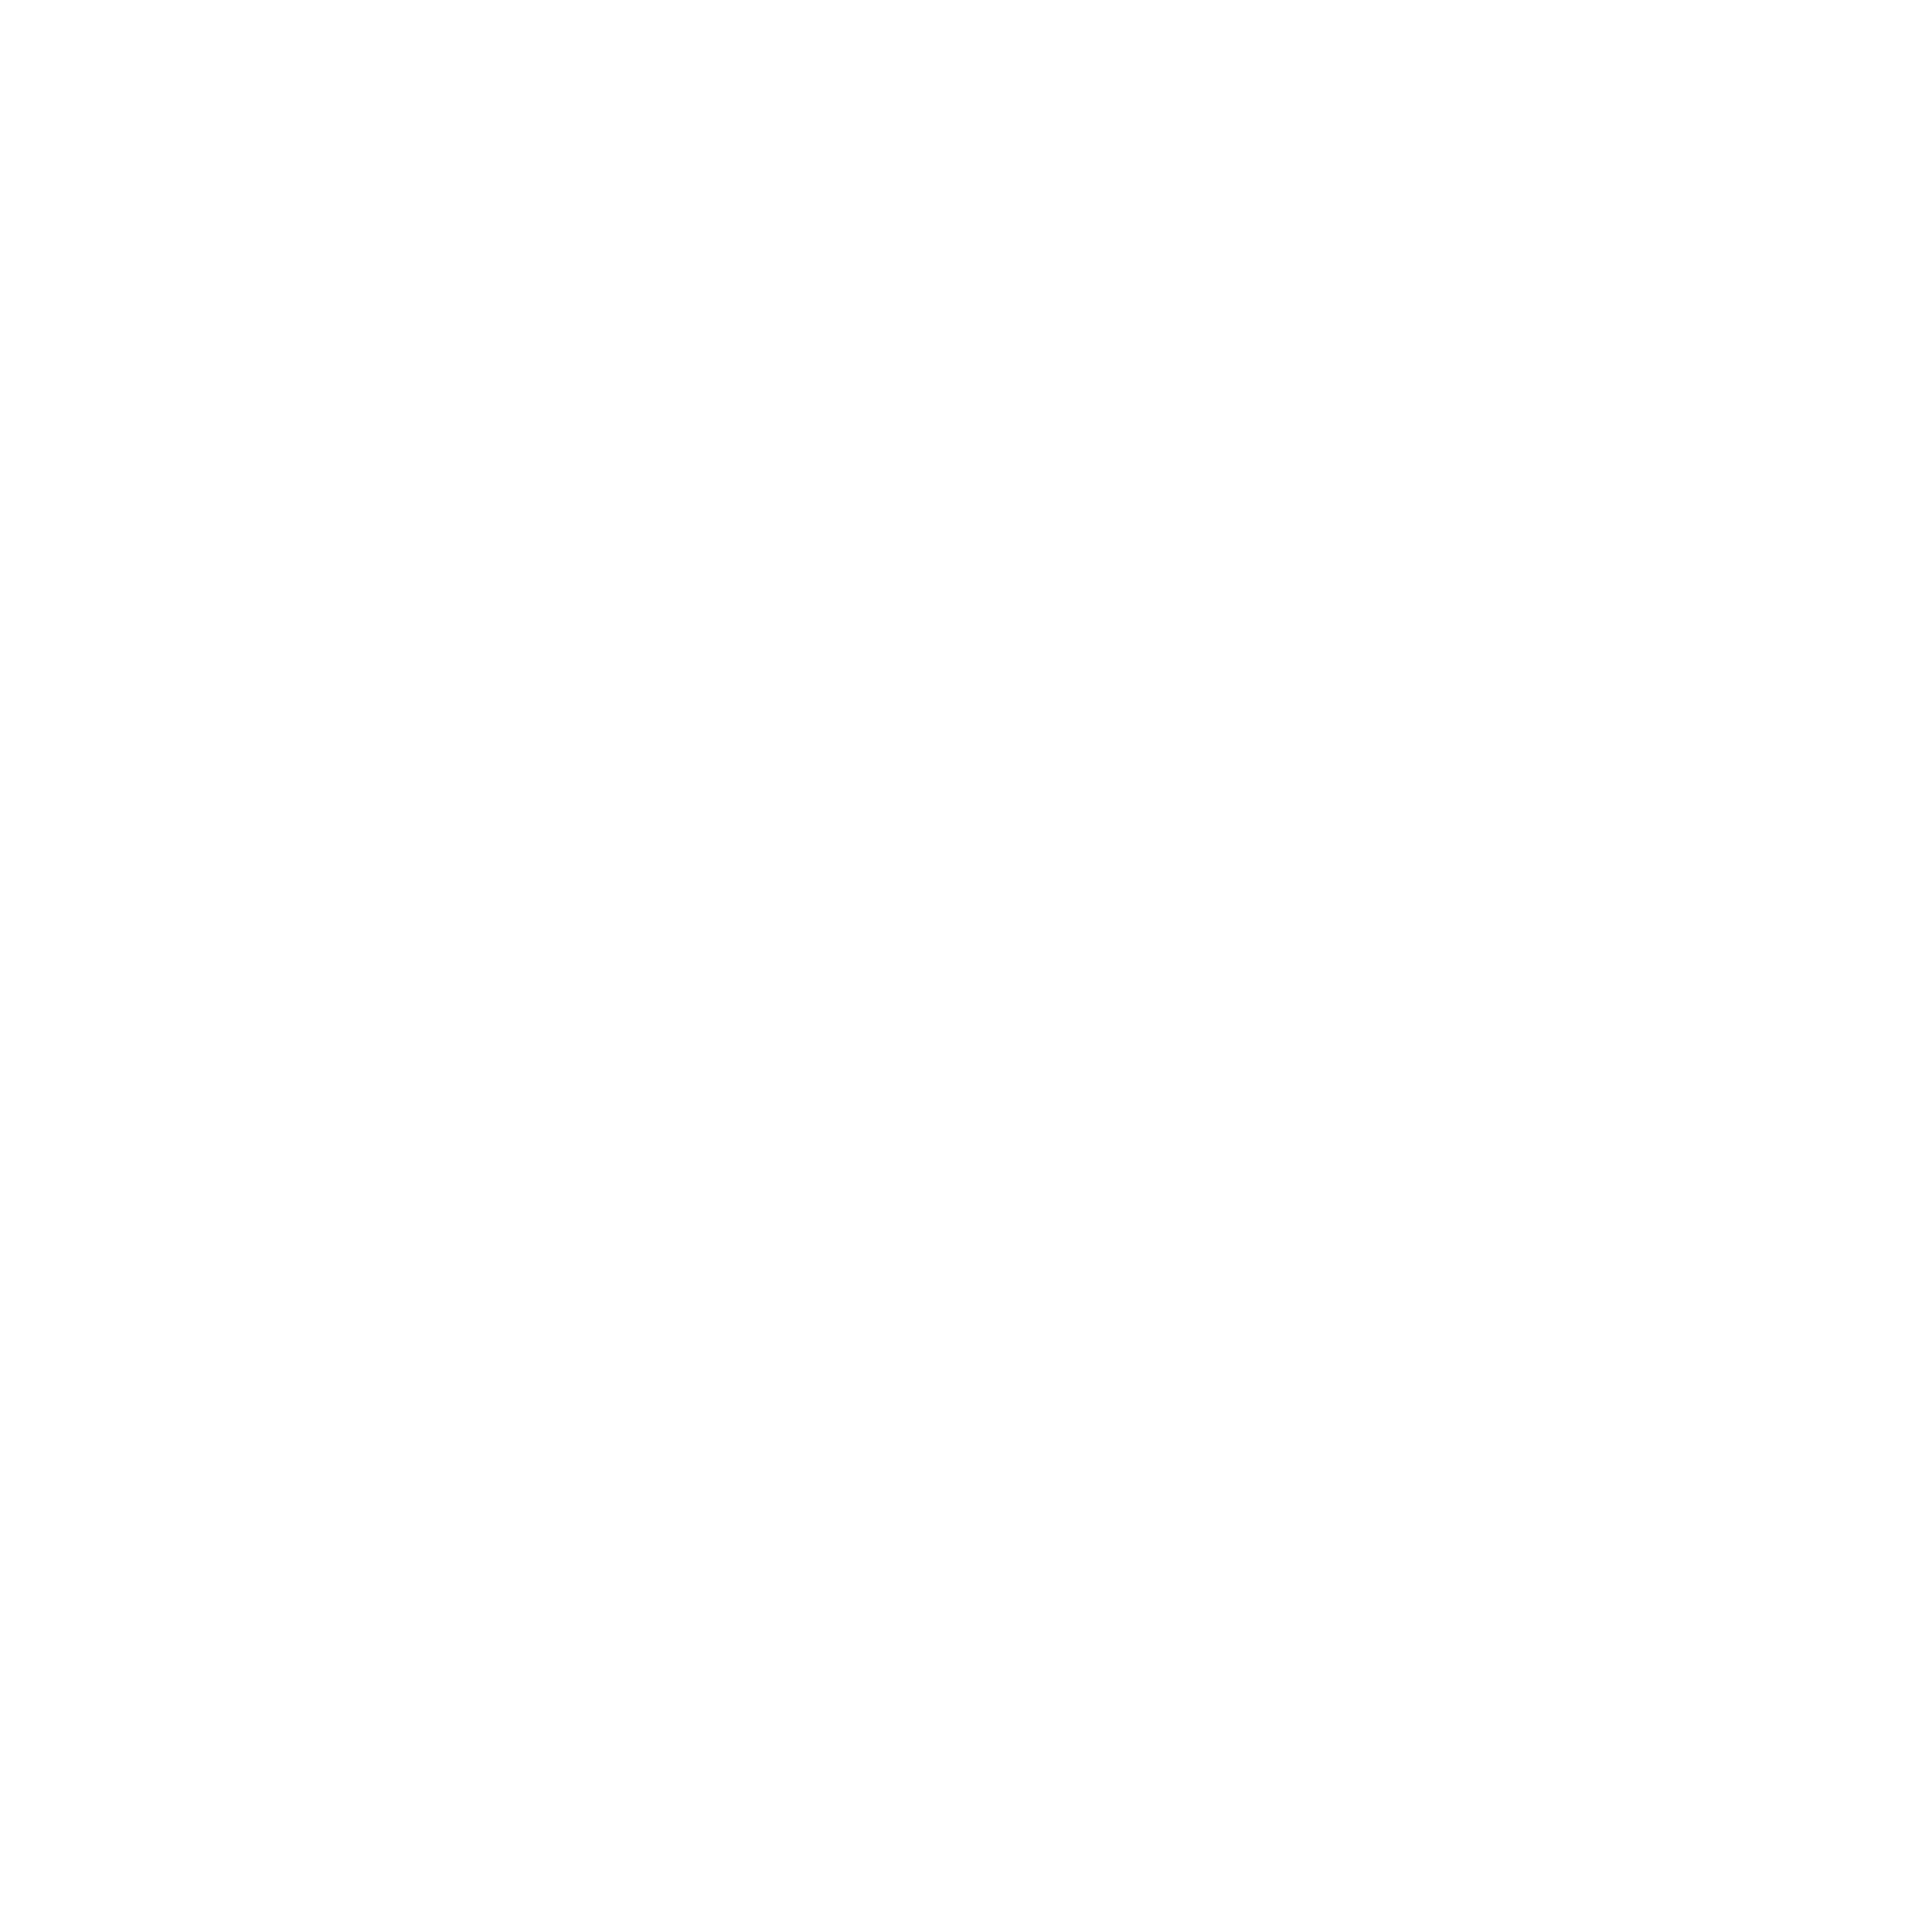 Priorlife Upcycled Bags  Banner Recycling and Sustainable Promotional  Products